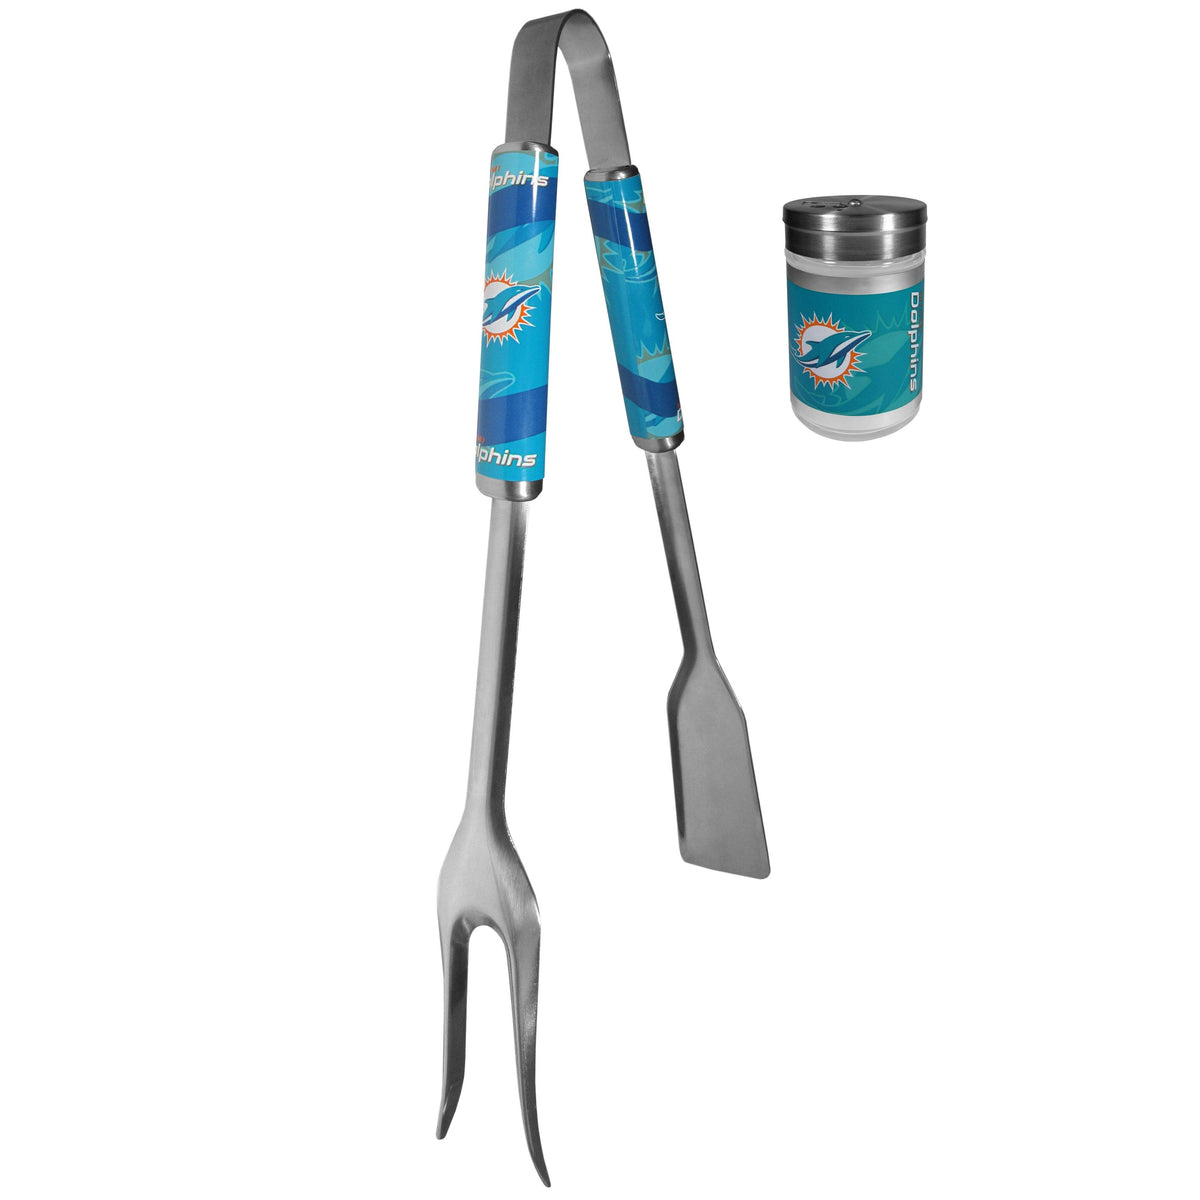 Miami Dolphins 3 in 1 BBQ Tool and Salt & Pepper Shaker - Flyclothing LLC